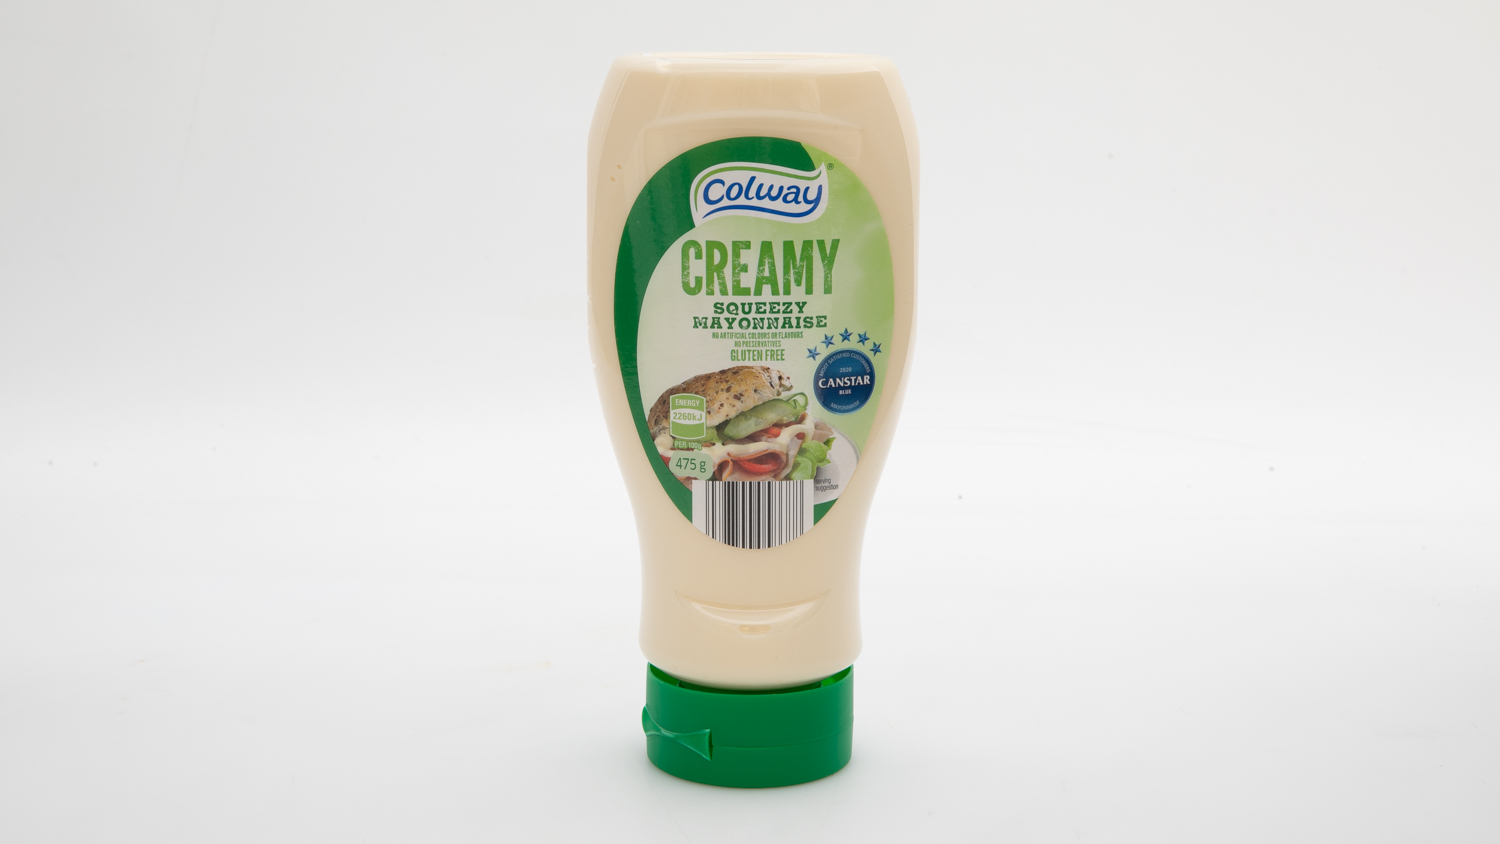 Aldi Colway Creamy Squeezy Mayonnaise carousel image